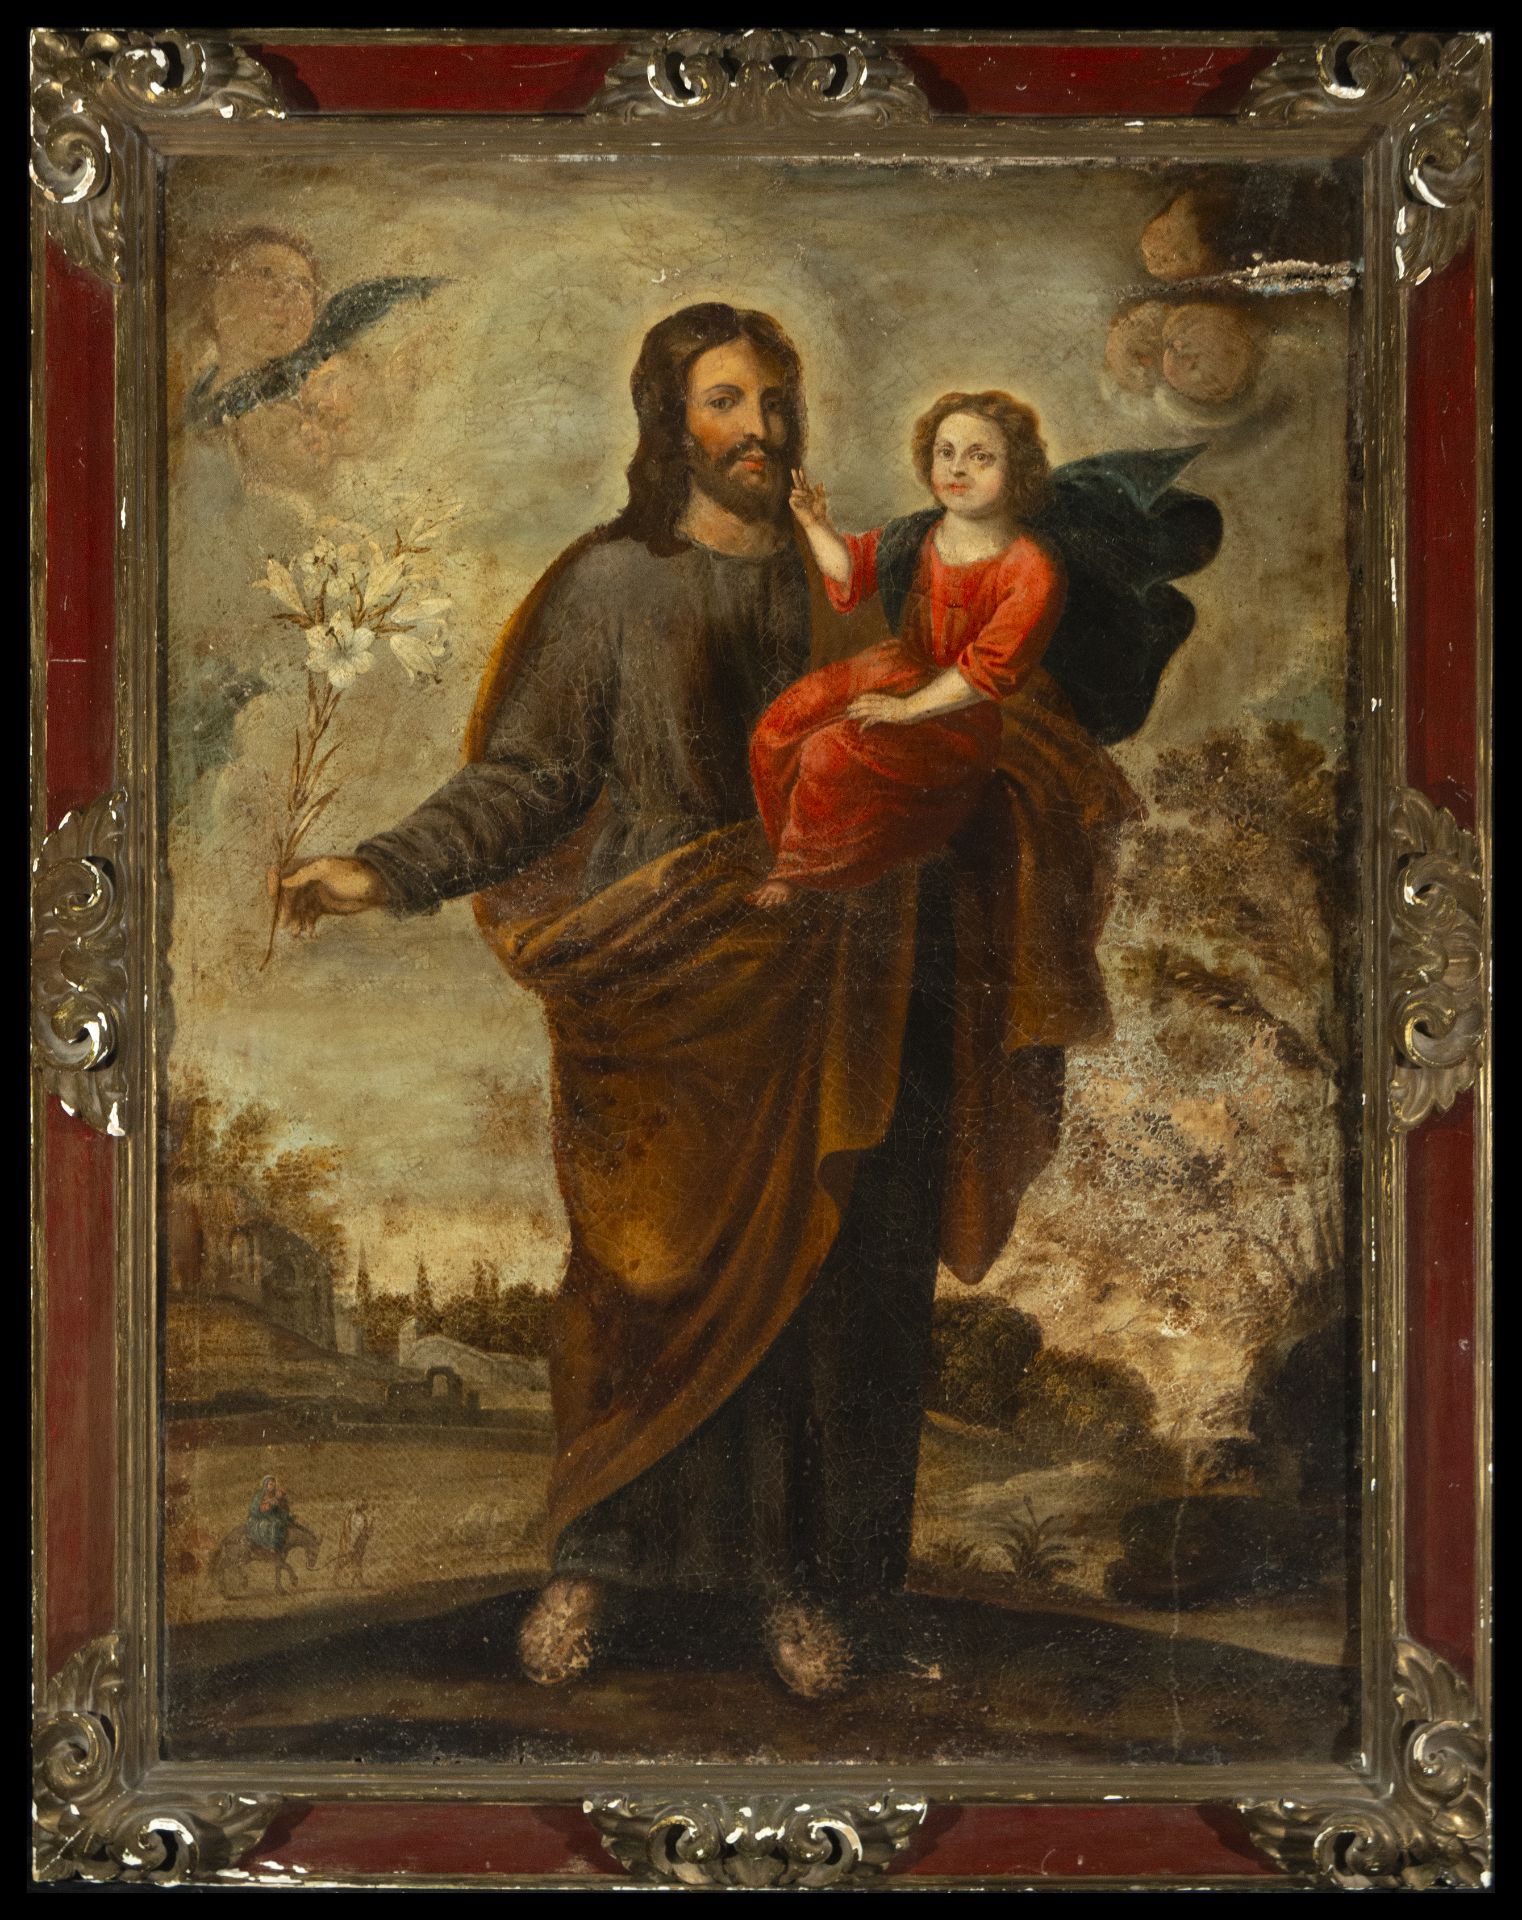 Saint Joseph with Child Jesus. Spanish or colonial school from the 17th century